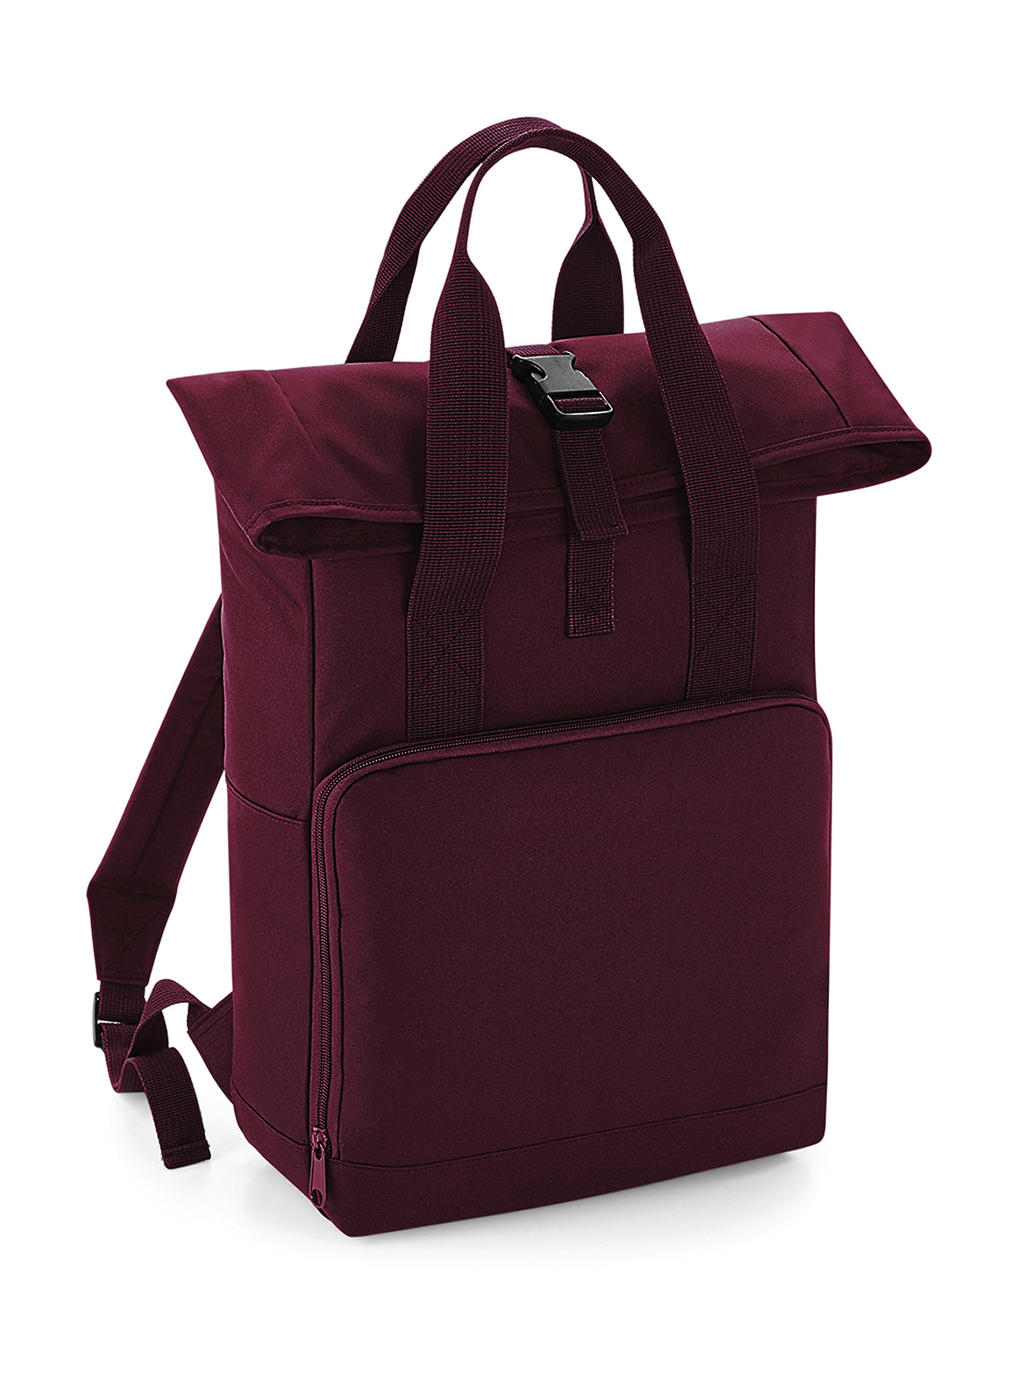  Twin Handle Roll-Top Backpack in Farbe Burgundy